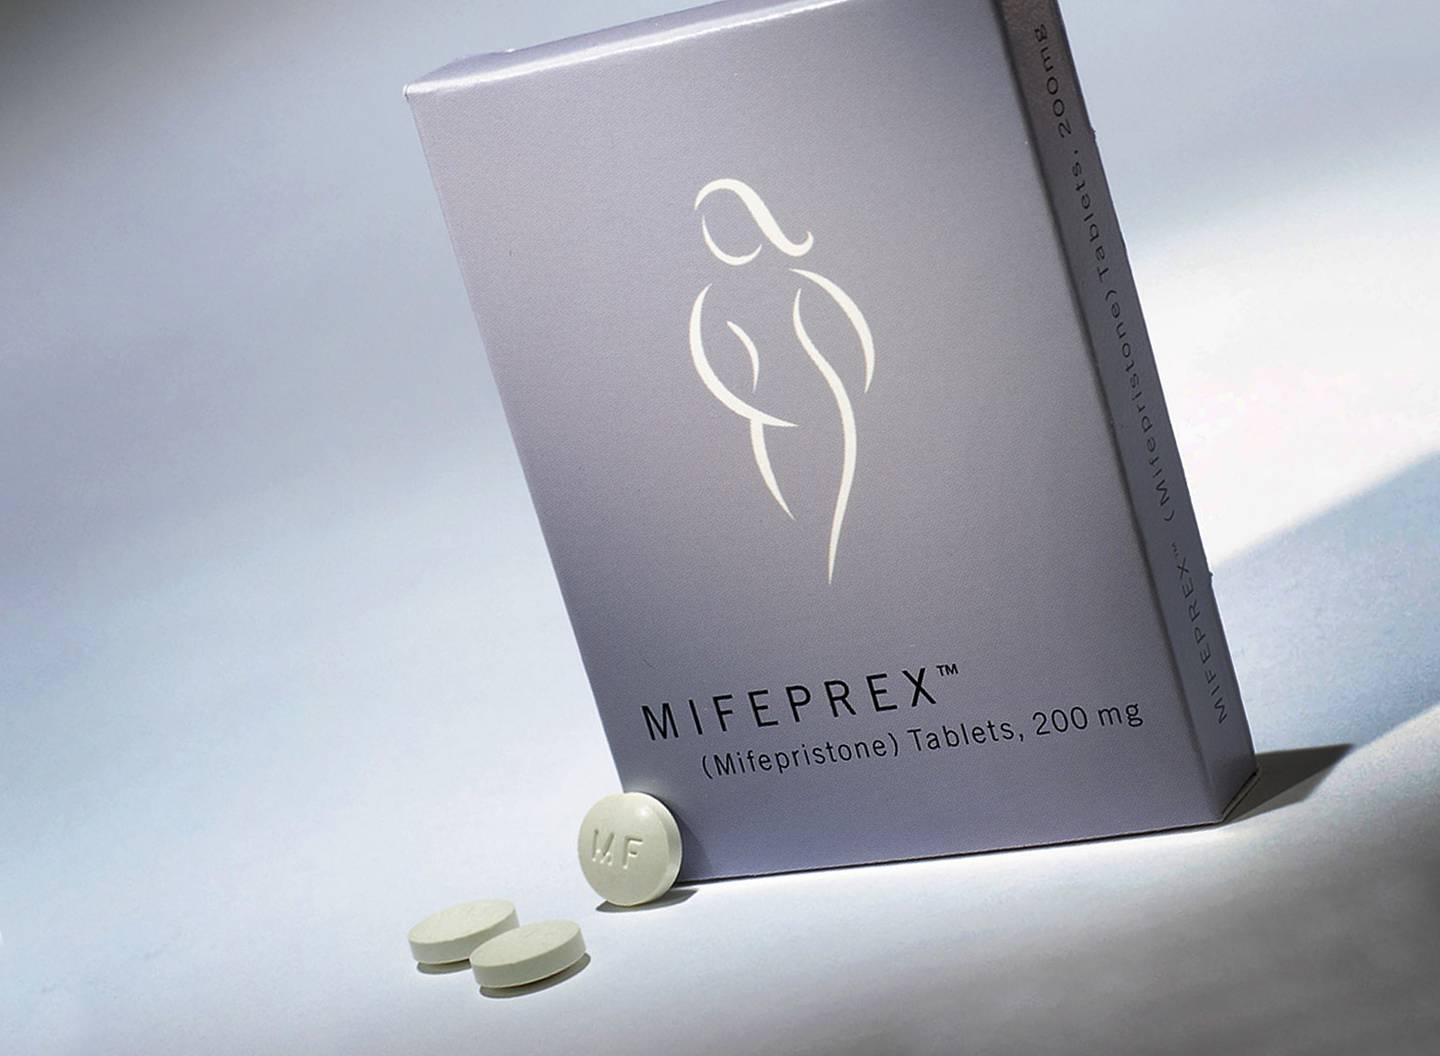 382212 01: The controversial abortion pill known as RU-486, seen here as Mifeprex, is being shipped to U.S. physicians for the first time beginning November 20, 2000 following approval of the drug by the Food and Drug Administration (FDA) in September.